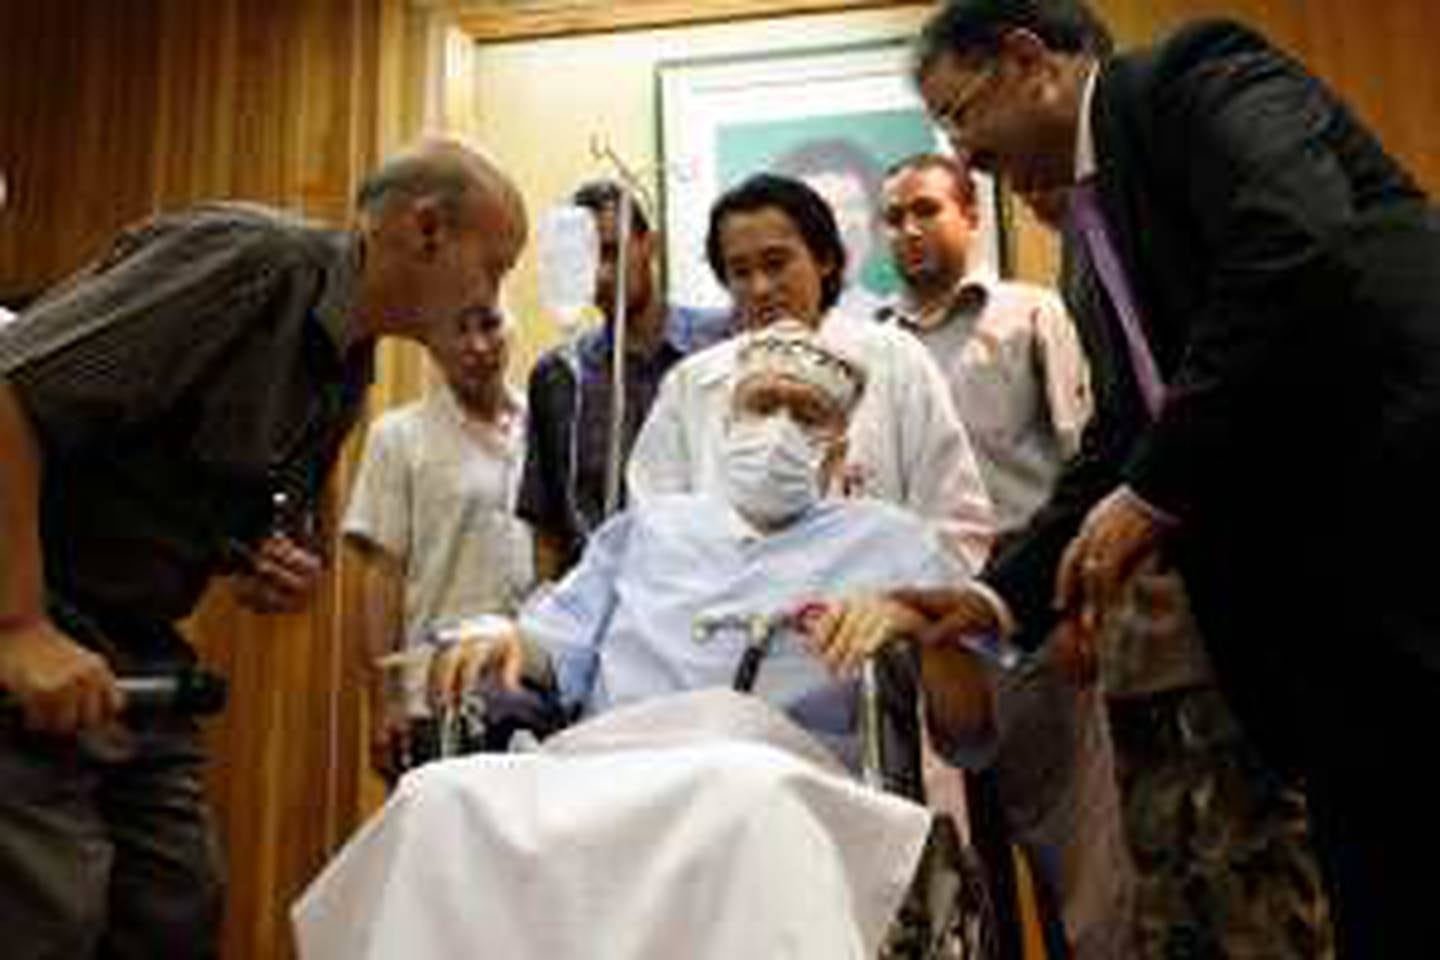 Abdel Basset al-Megrahi sits in a wheelchair in his room at a hospital in Tripoli September 9, 2009. The dying Libyan convicted of the 1988 Lockerbie bombing and freed on compassionate grounds despite U.S. objections was met by African parliamentary deputies on Wednesday in an apparent public show of support. REUTERS/Ismail Zetouny (LIBYA POLITICS IMAGES OF THE DAY)